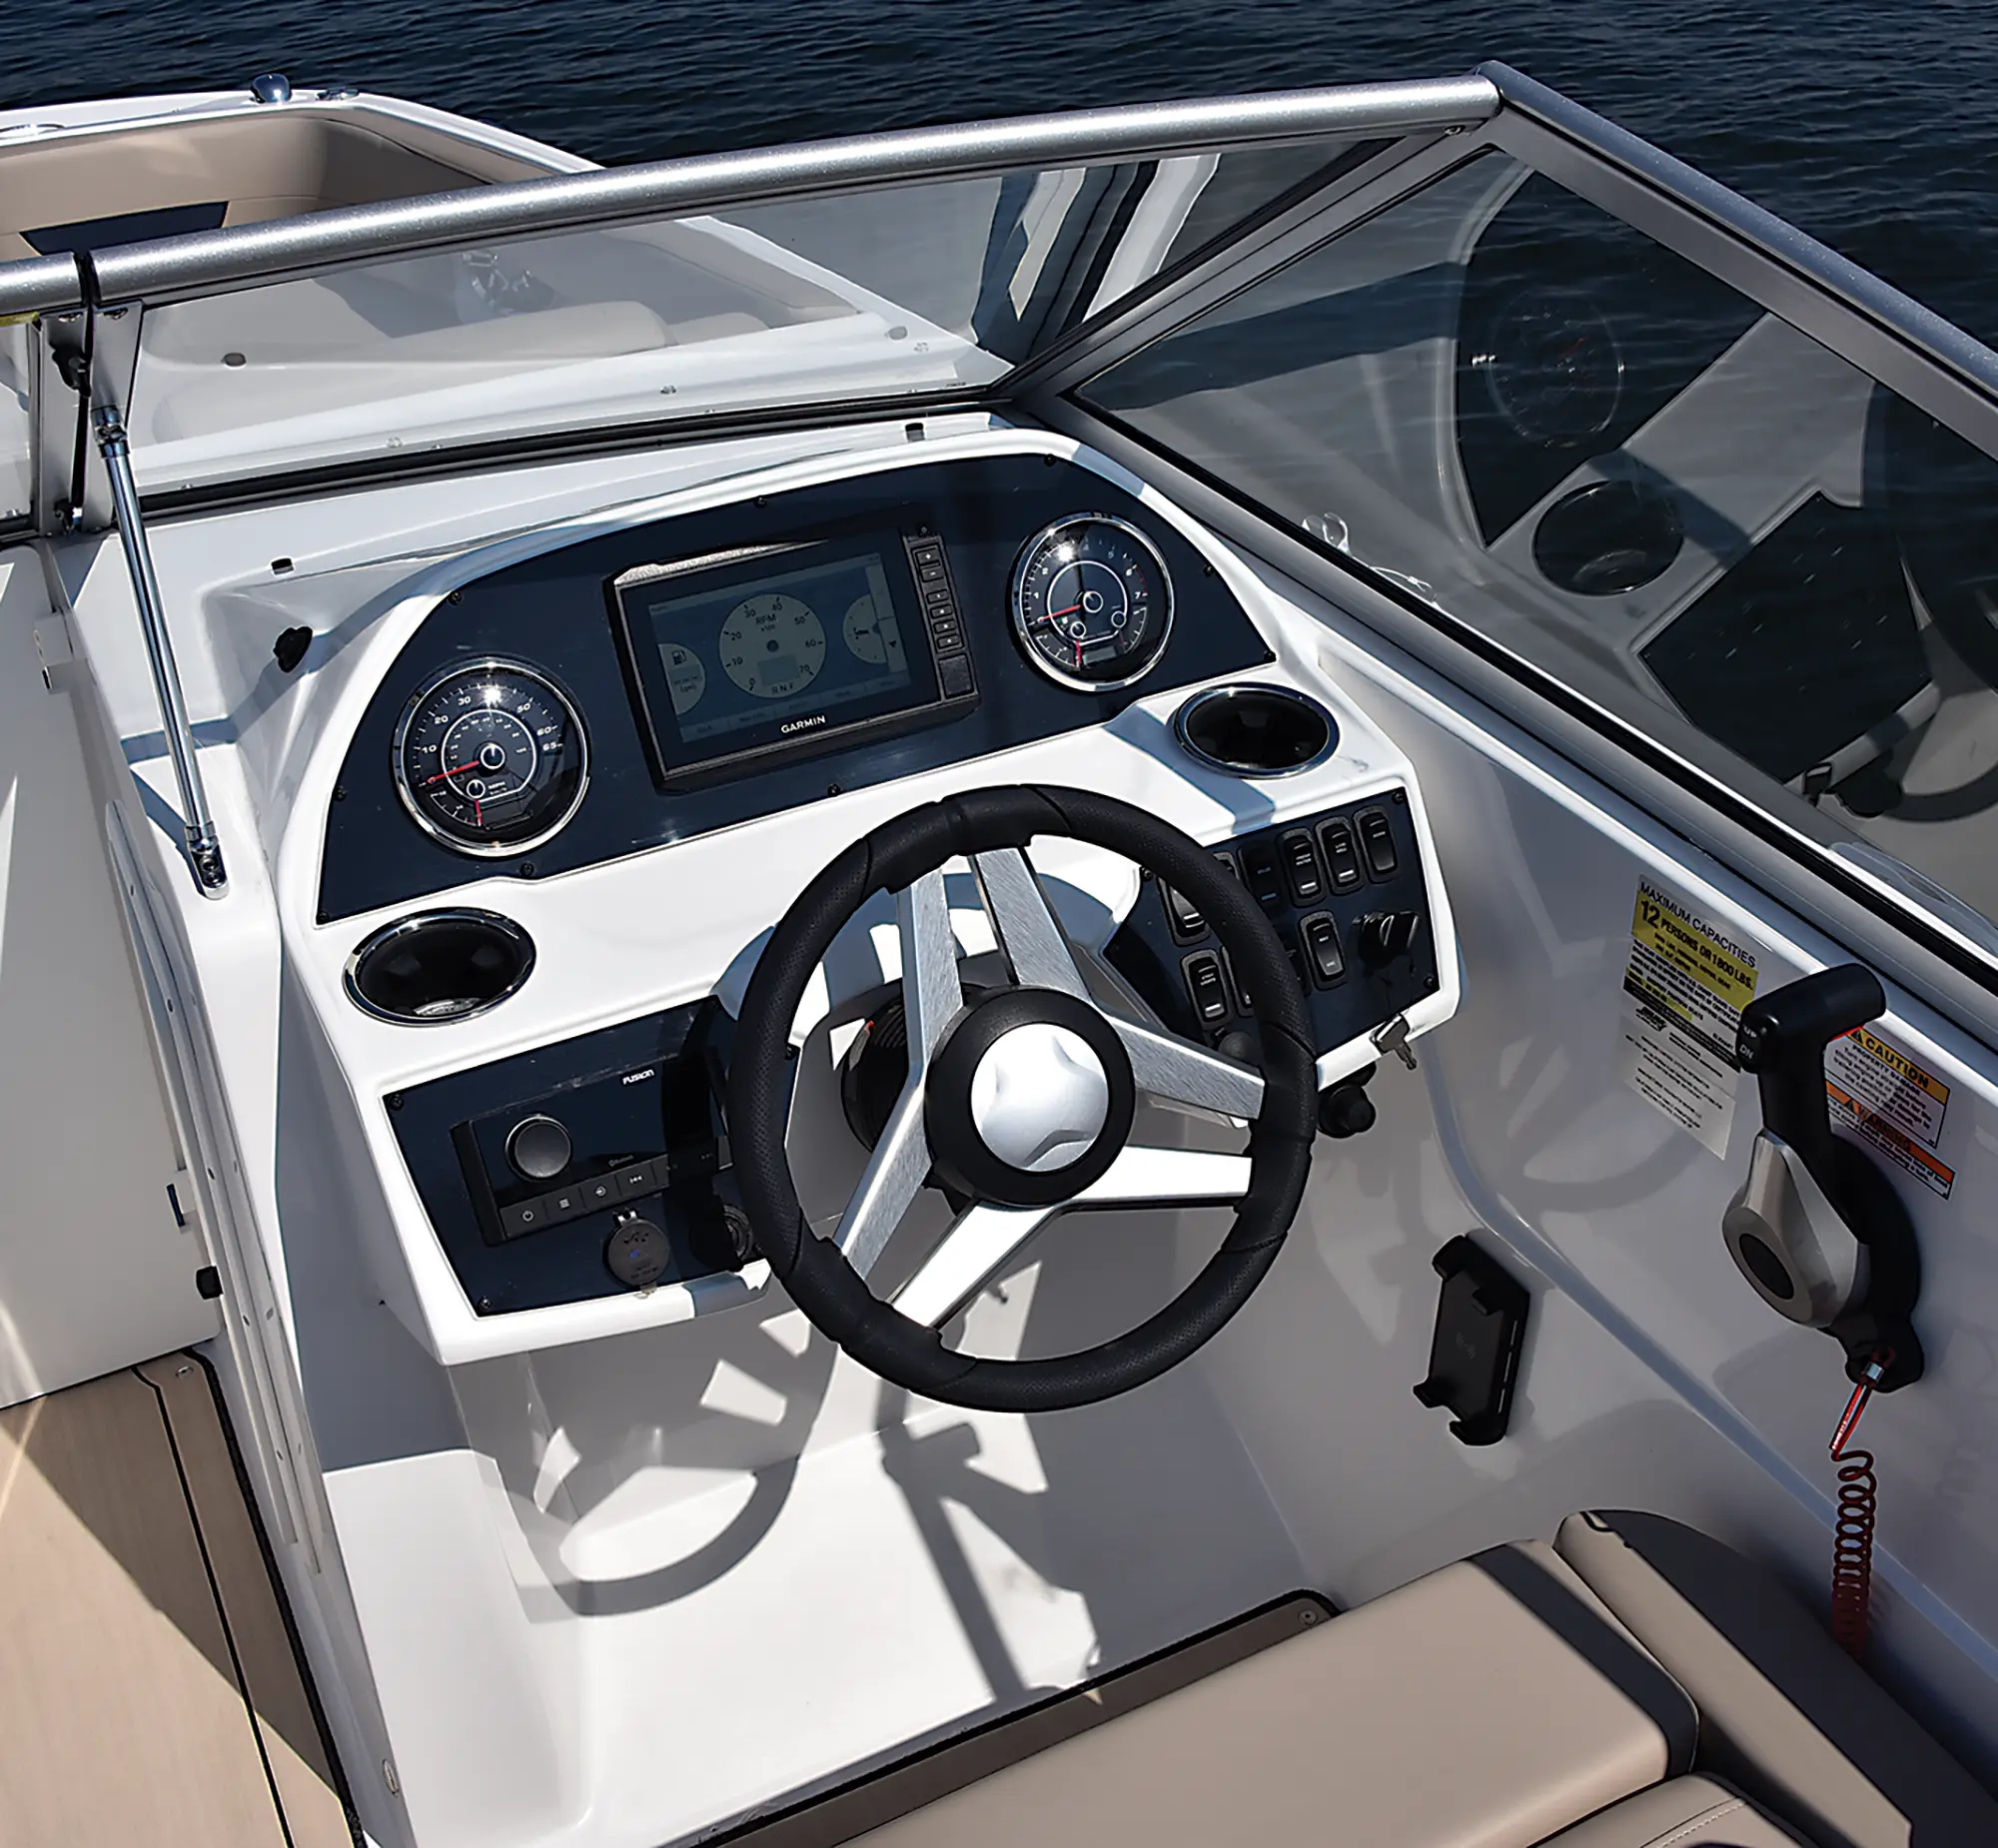 Aerial interior photo view of the driver's side area of the Hurricane SunDeck 235 pontoon motorboat vehicle